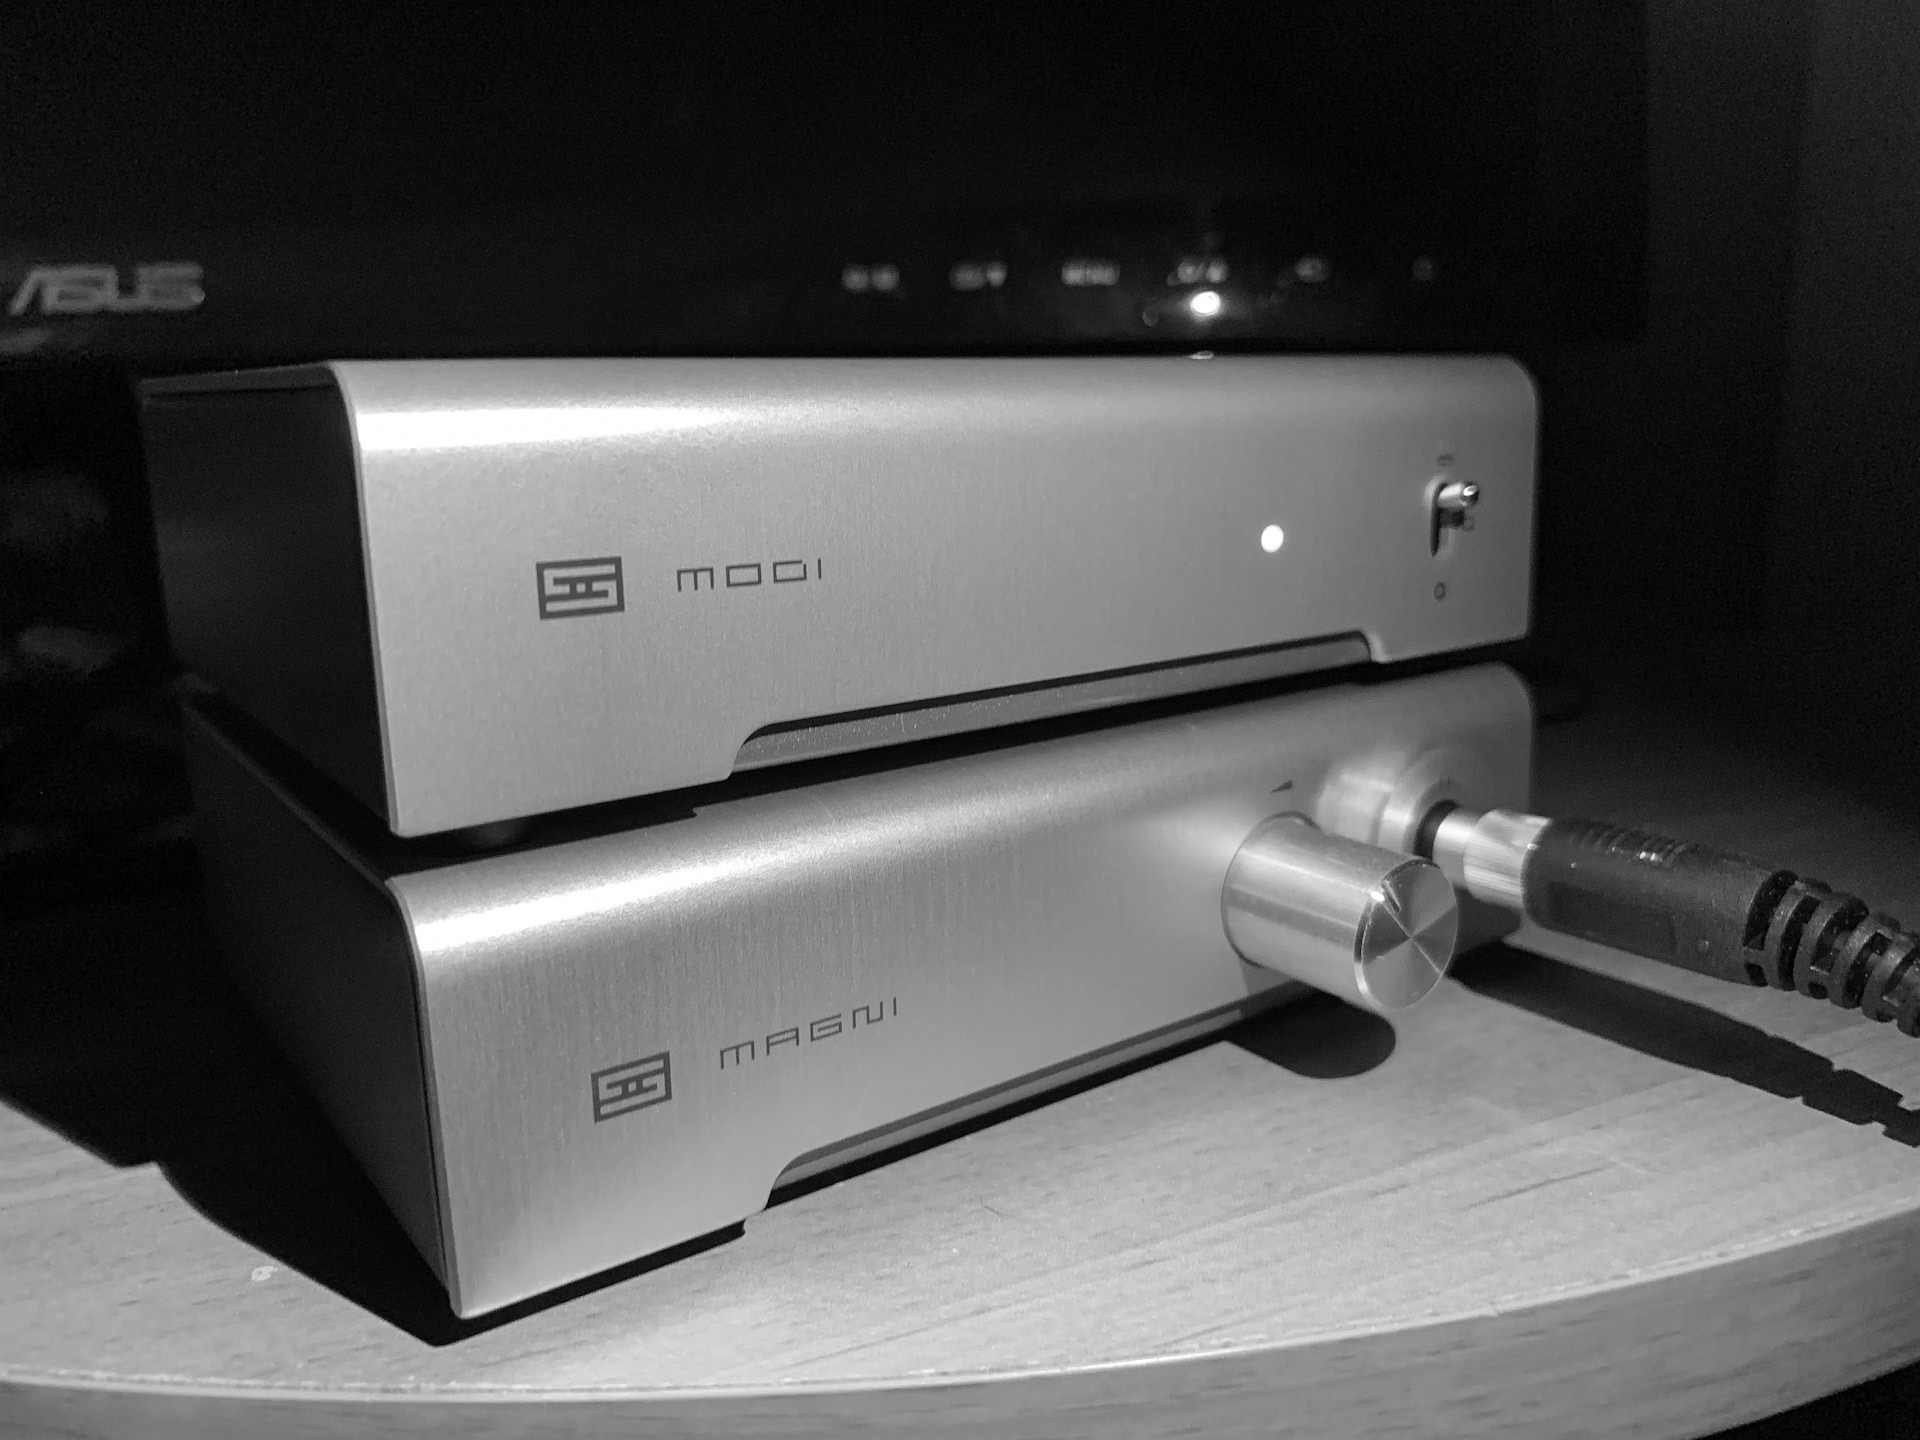 topping stack vs schiit stack